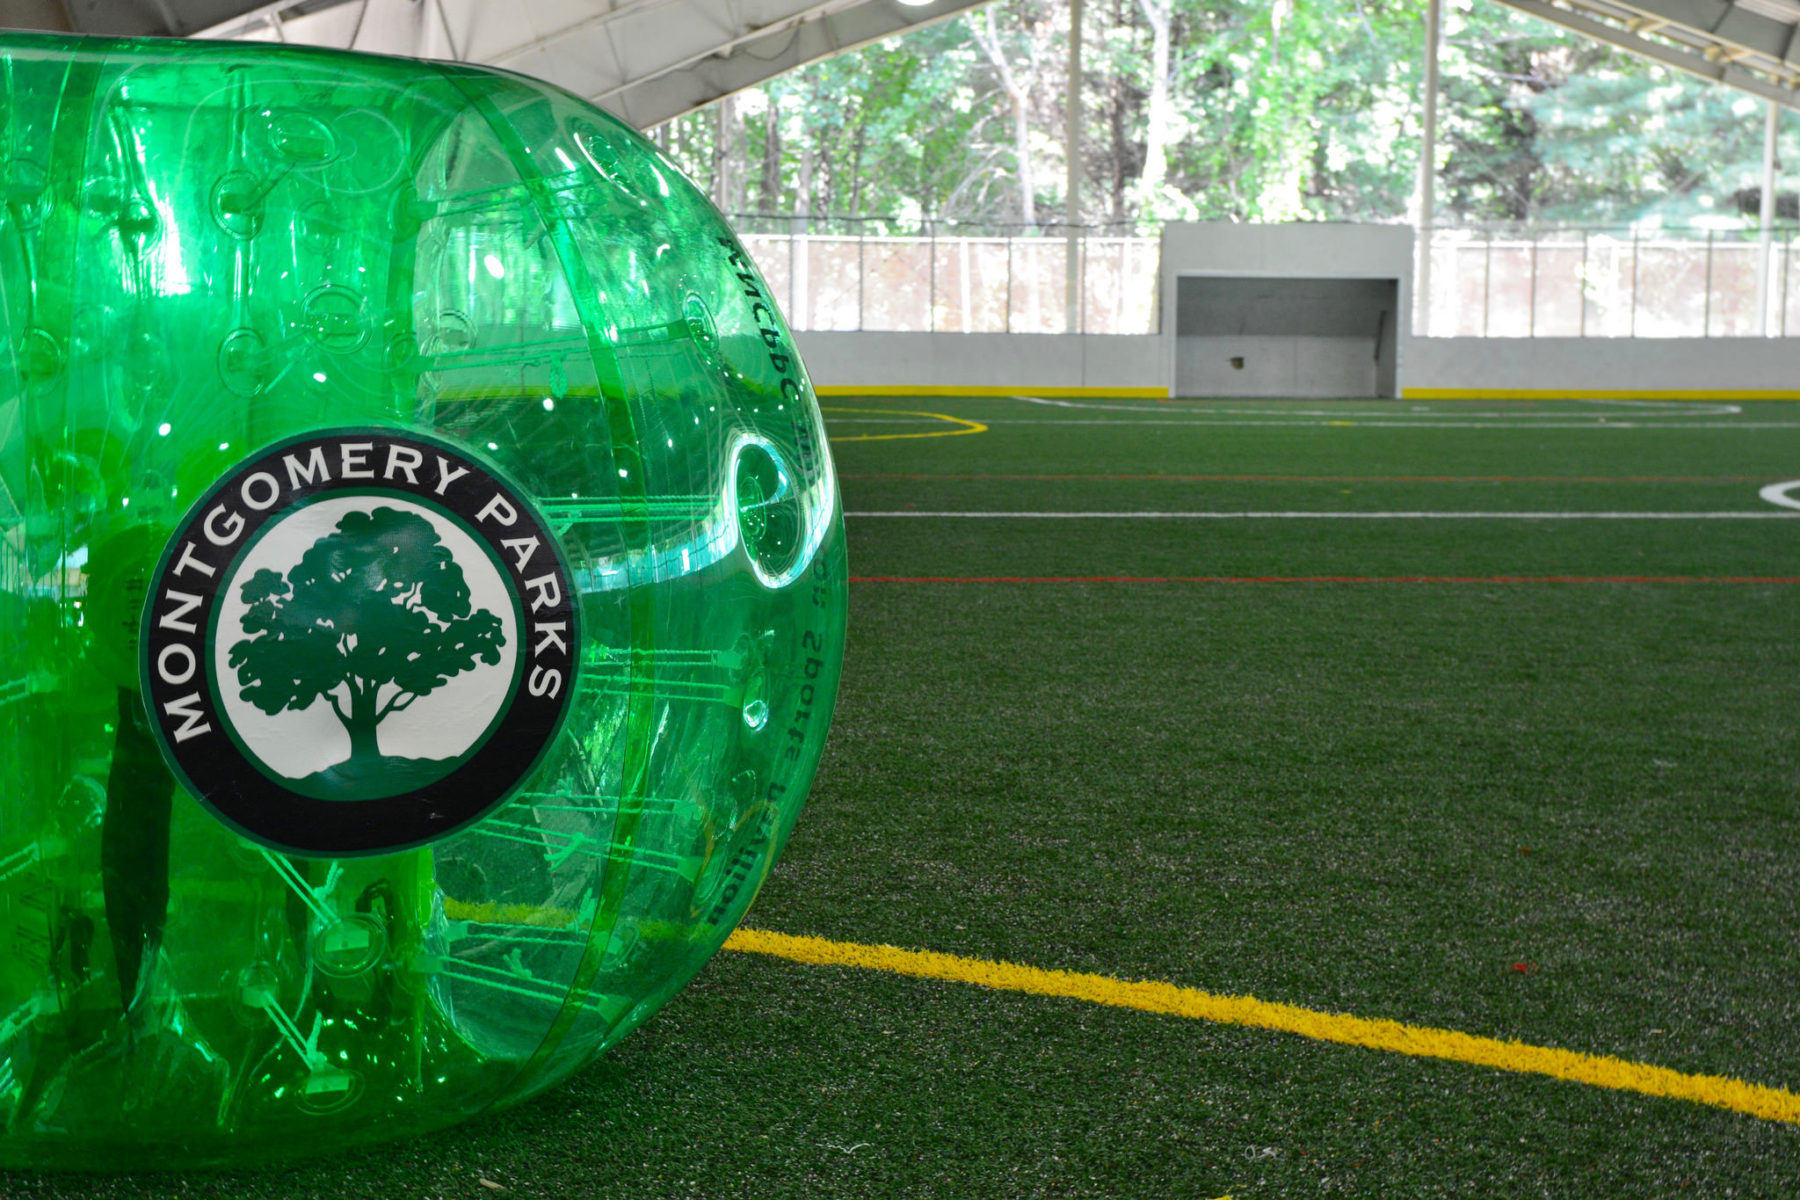 Wheaton Sports Pavilion offers bubble soccer party packages and facility rentals.